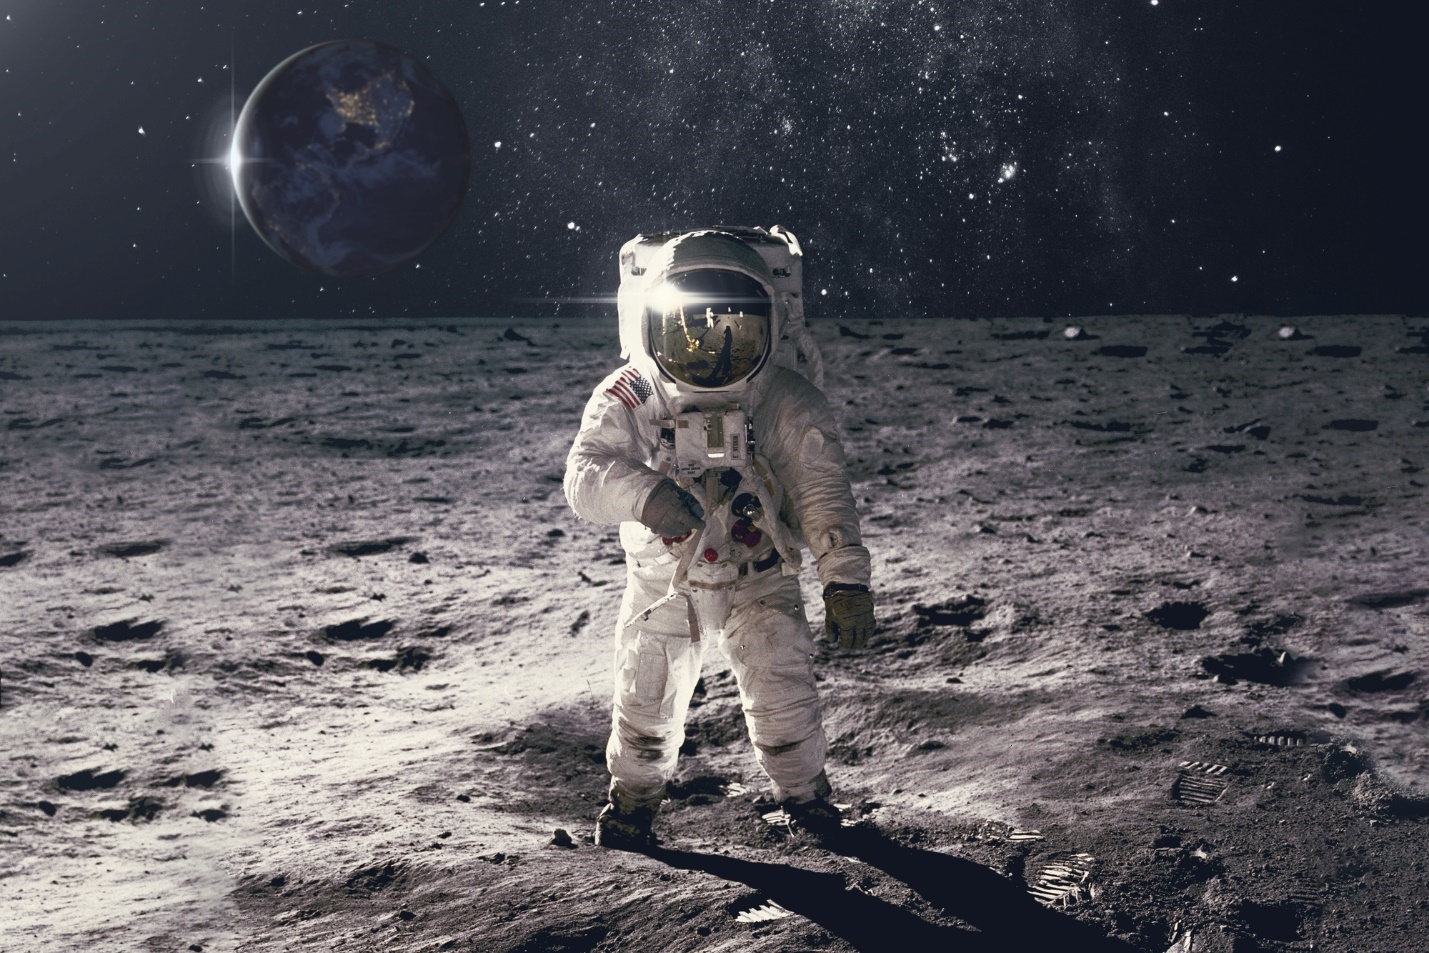 A person in a space suit on the moon

Description automatically generated with low confidence